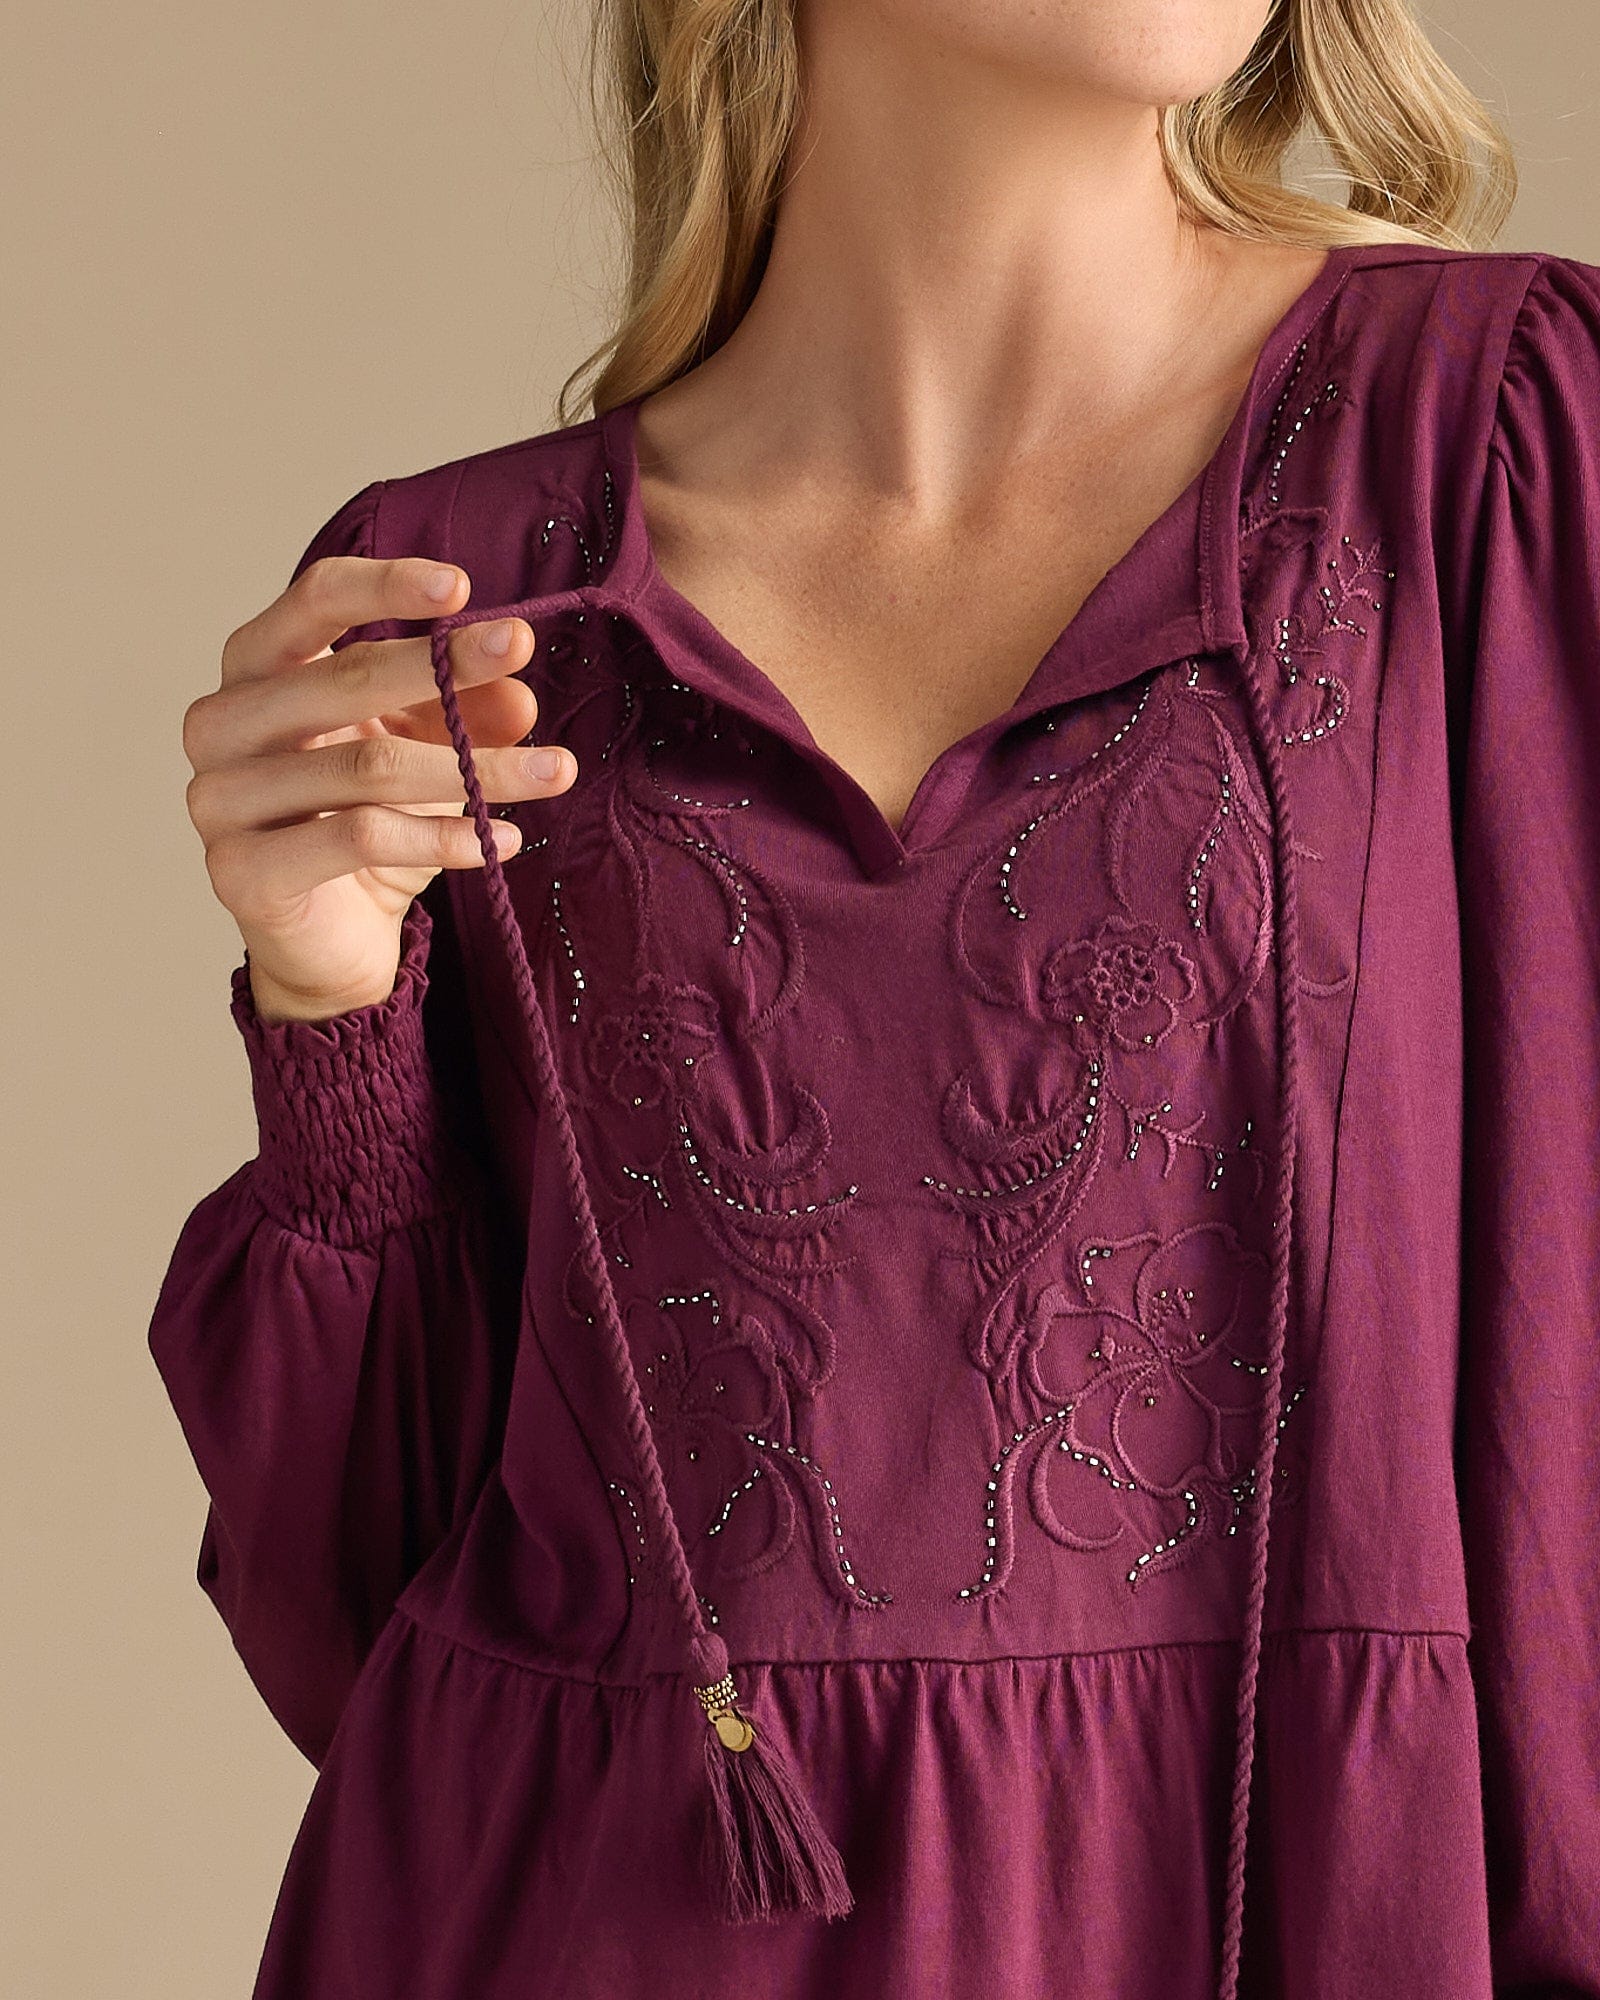 Woman in a purple blouse with peplum gathering and embroidered bib